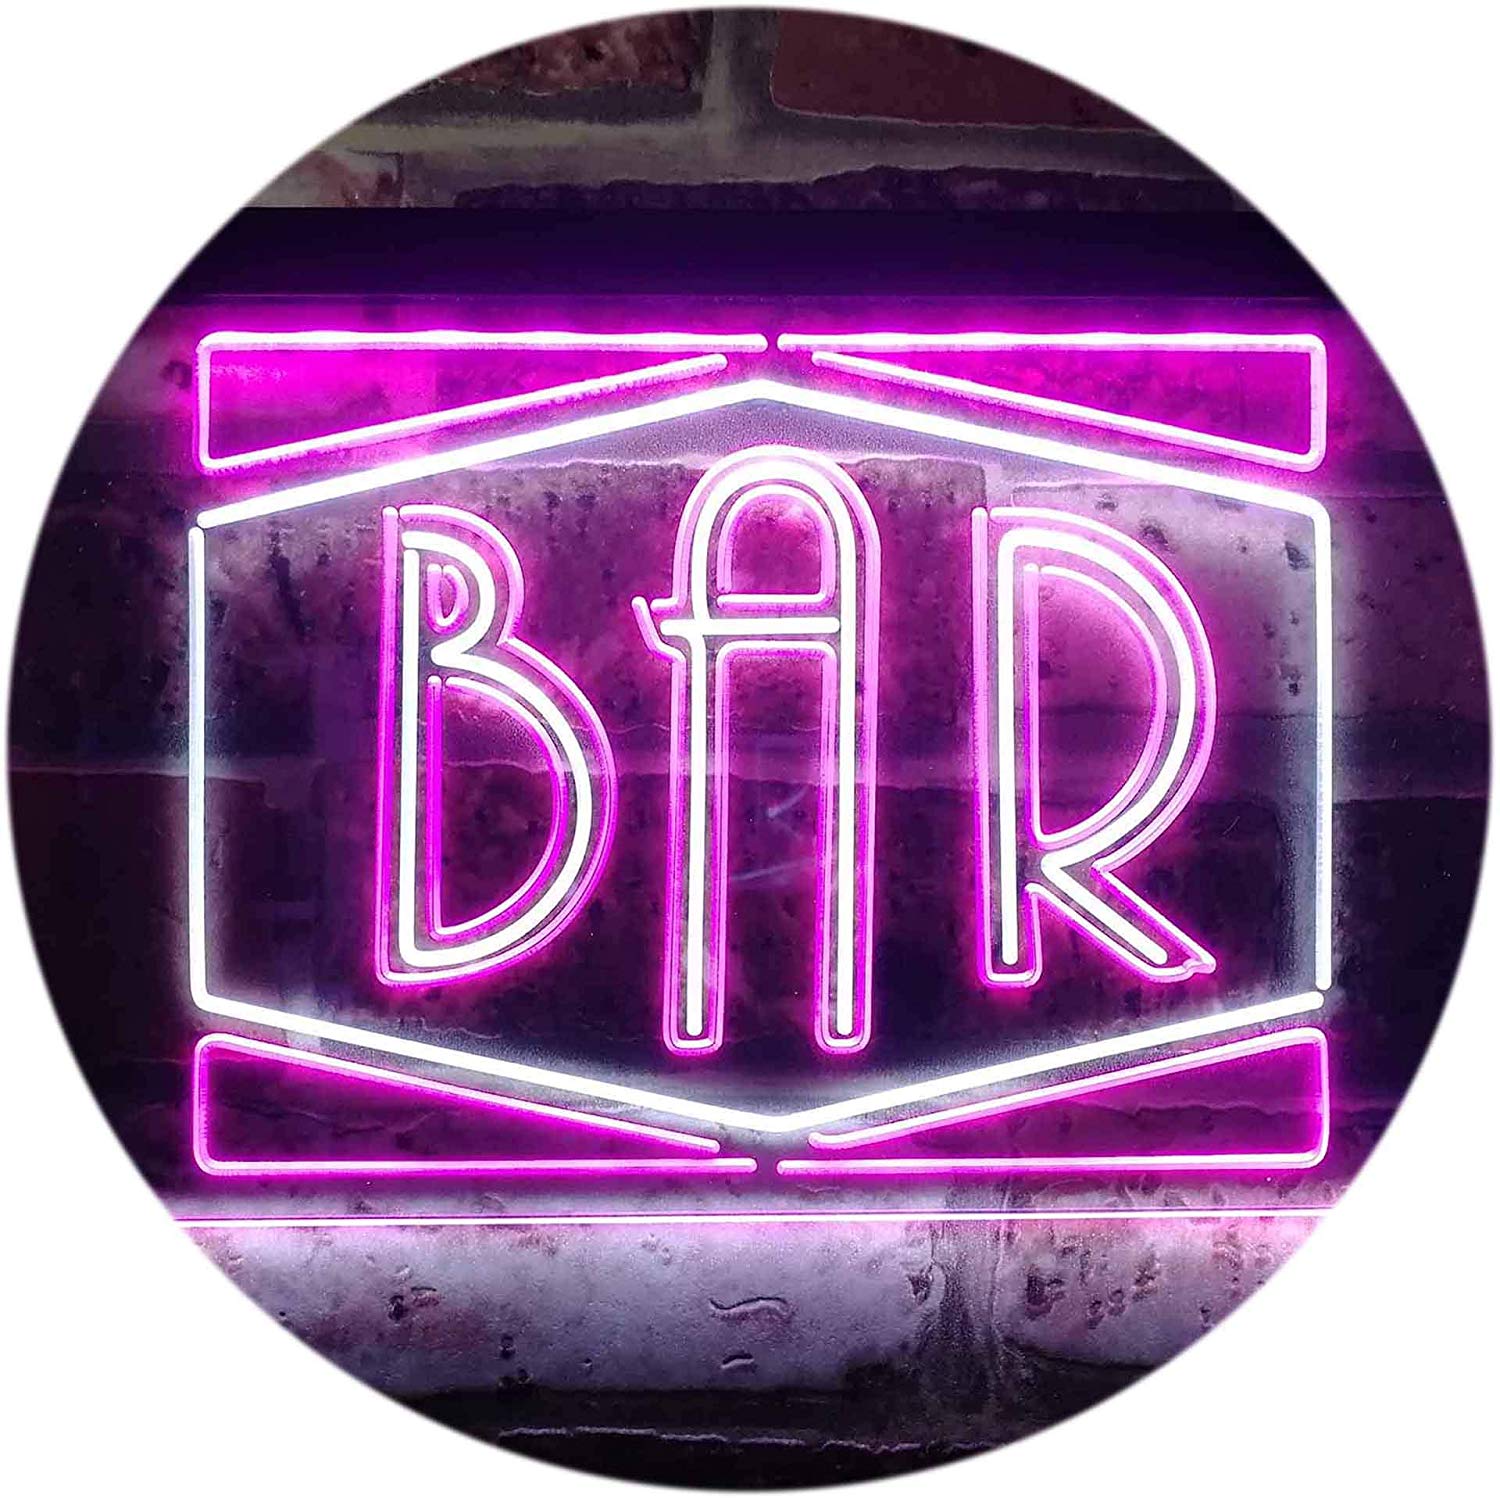 Bar Sign LED Neon Light Sign - Way Up Gifts